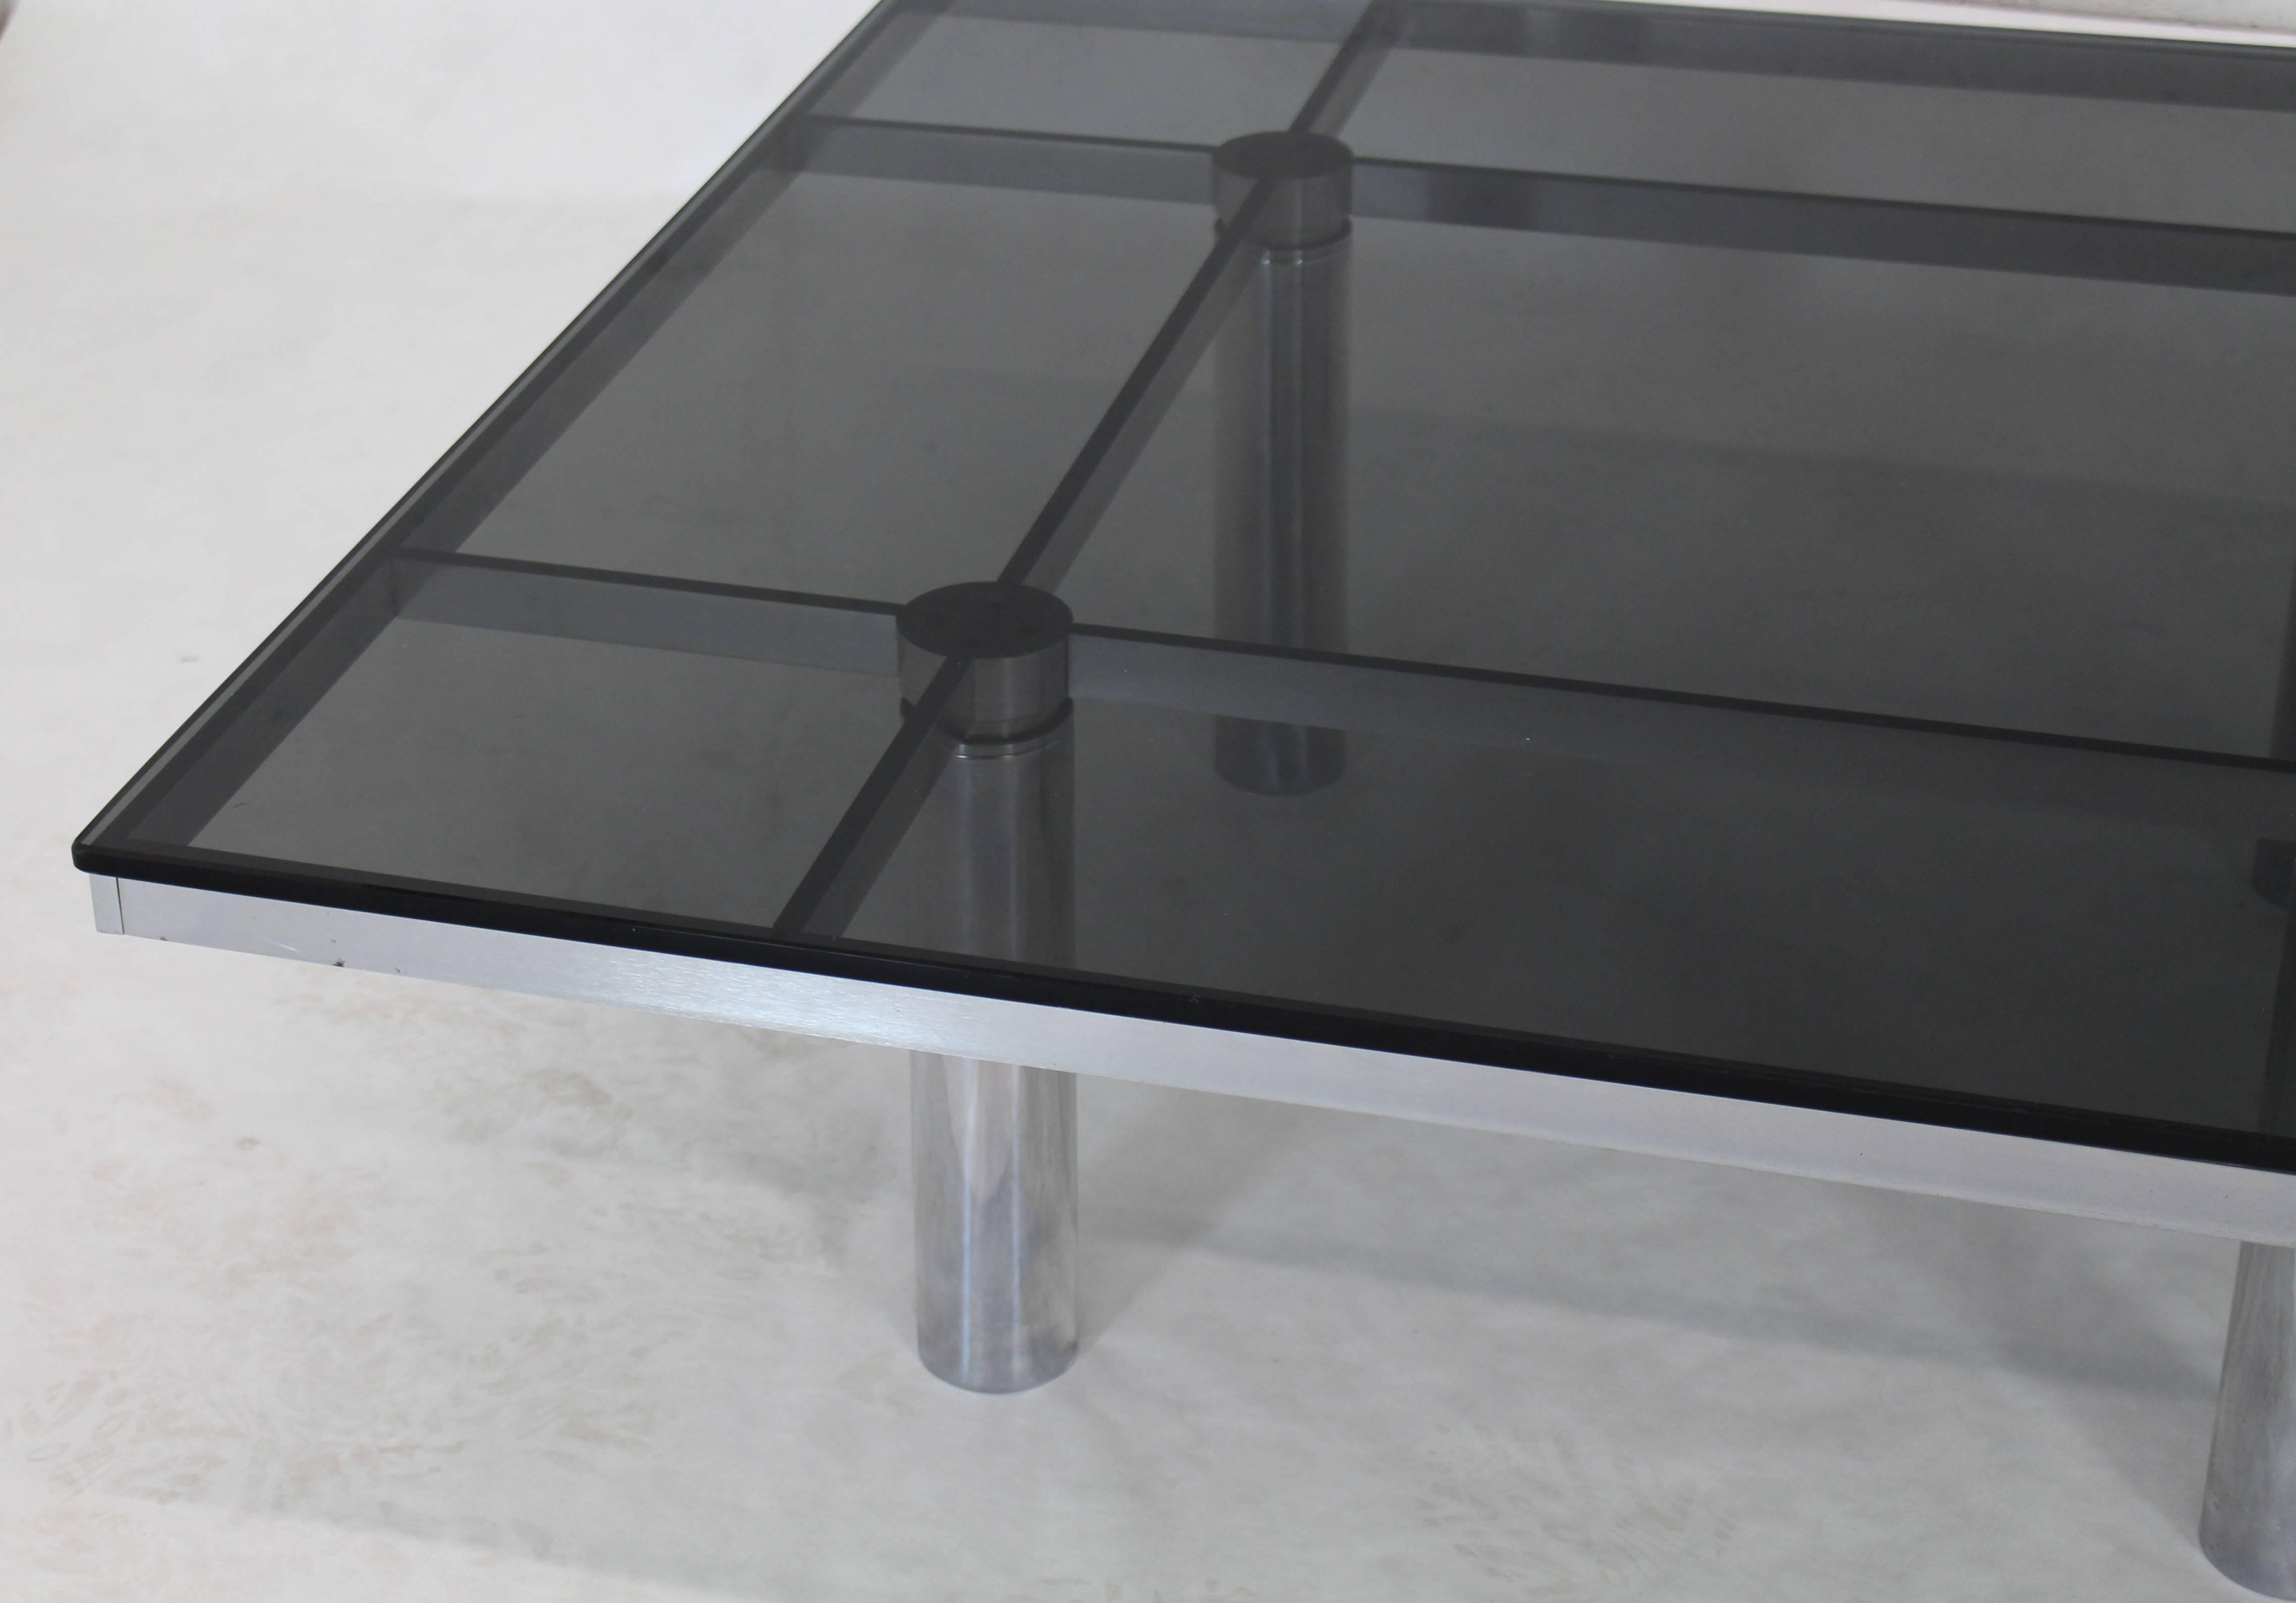 Bronzed Square Chrome Smoke Glass Coffee Table by Tobia Scarpa for Knoll